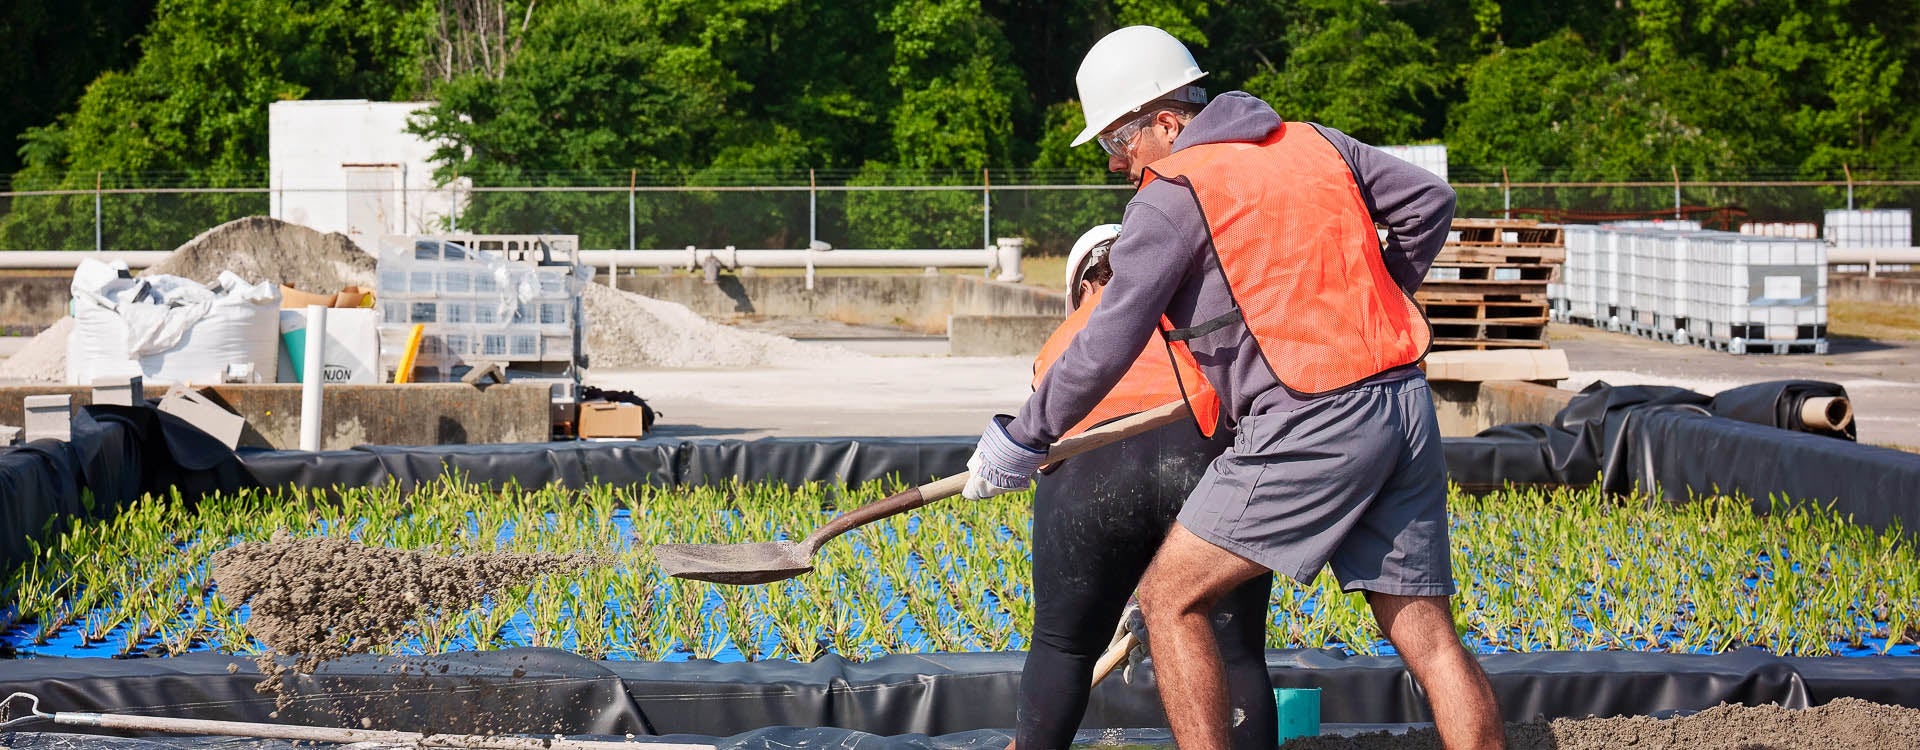 ECU students work to create a hybrid constructed wetland system at the Greenville Utilities Wastewater Treatment Plant. The system is designed to reduce the amount of nitrogen and phosphorus in wastewater. (Photo by Cliff Hollis)